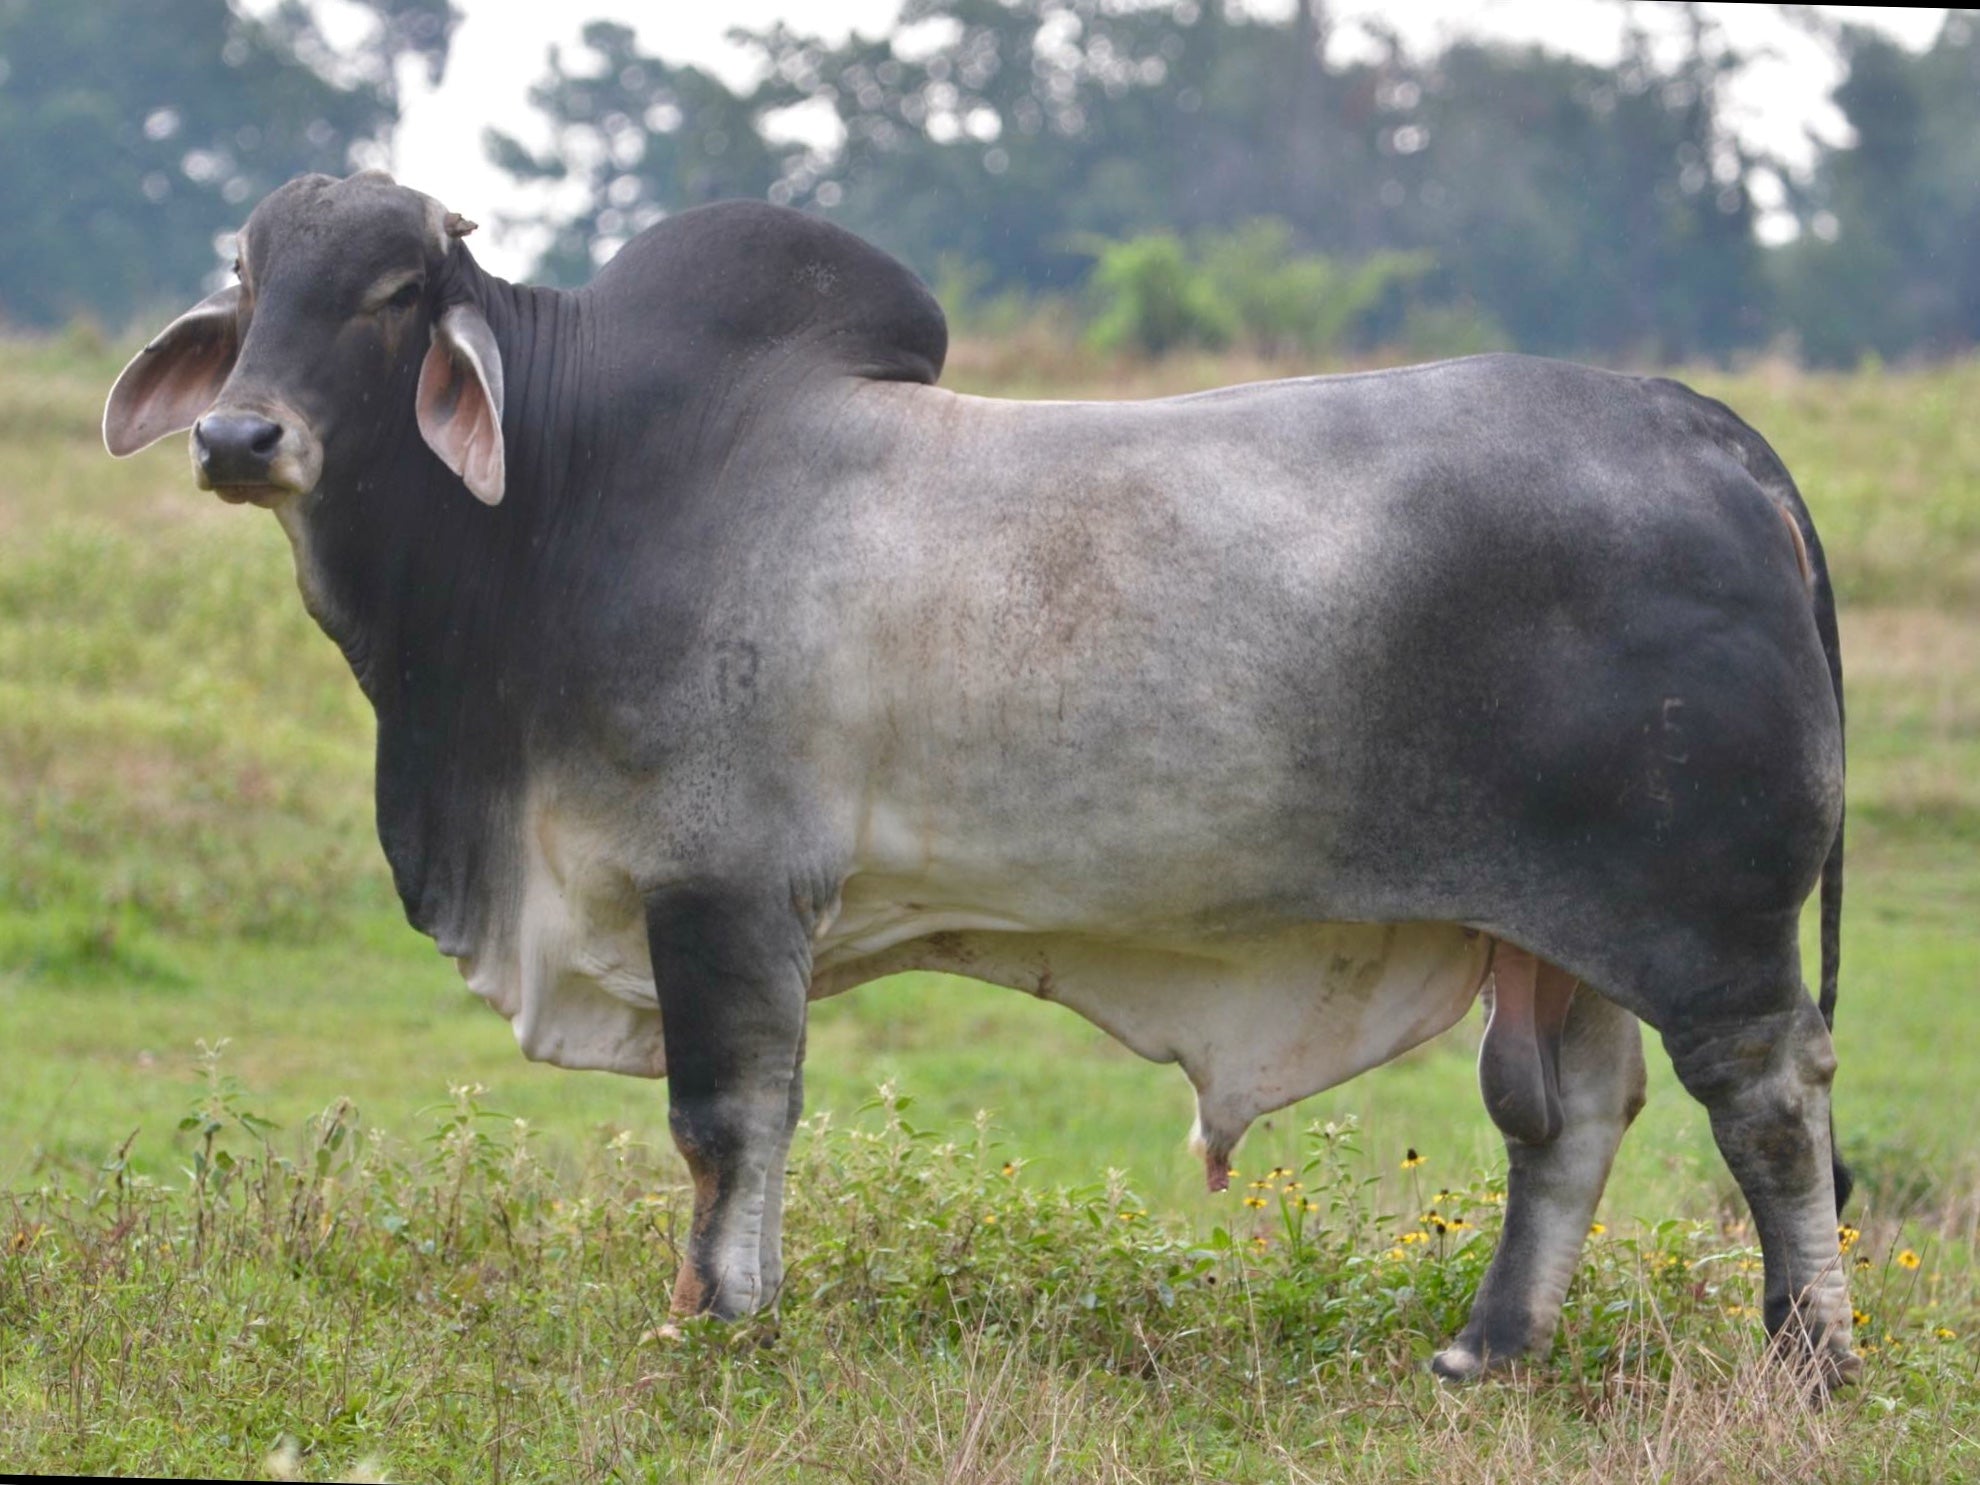 Package of 5 Conventional Embryos - Butler Polled Megatron 75/3 x LMC Polled Gayla 144/5